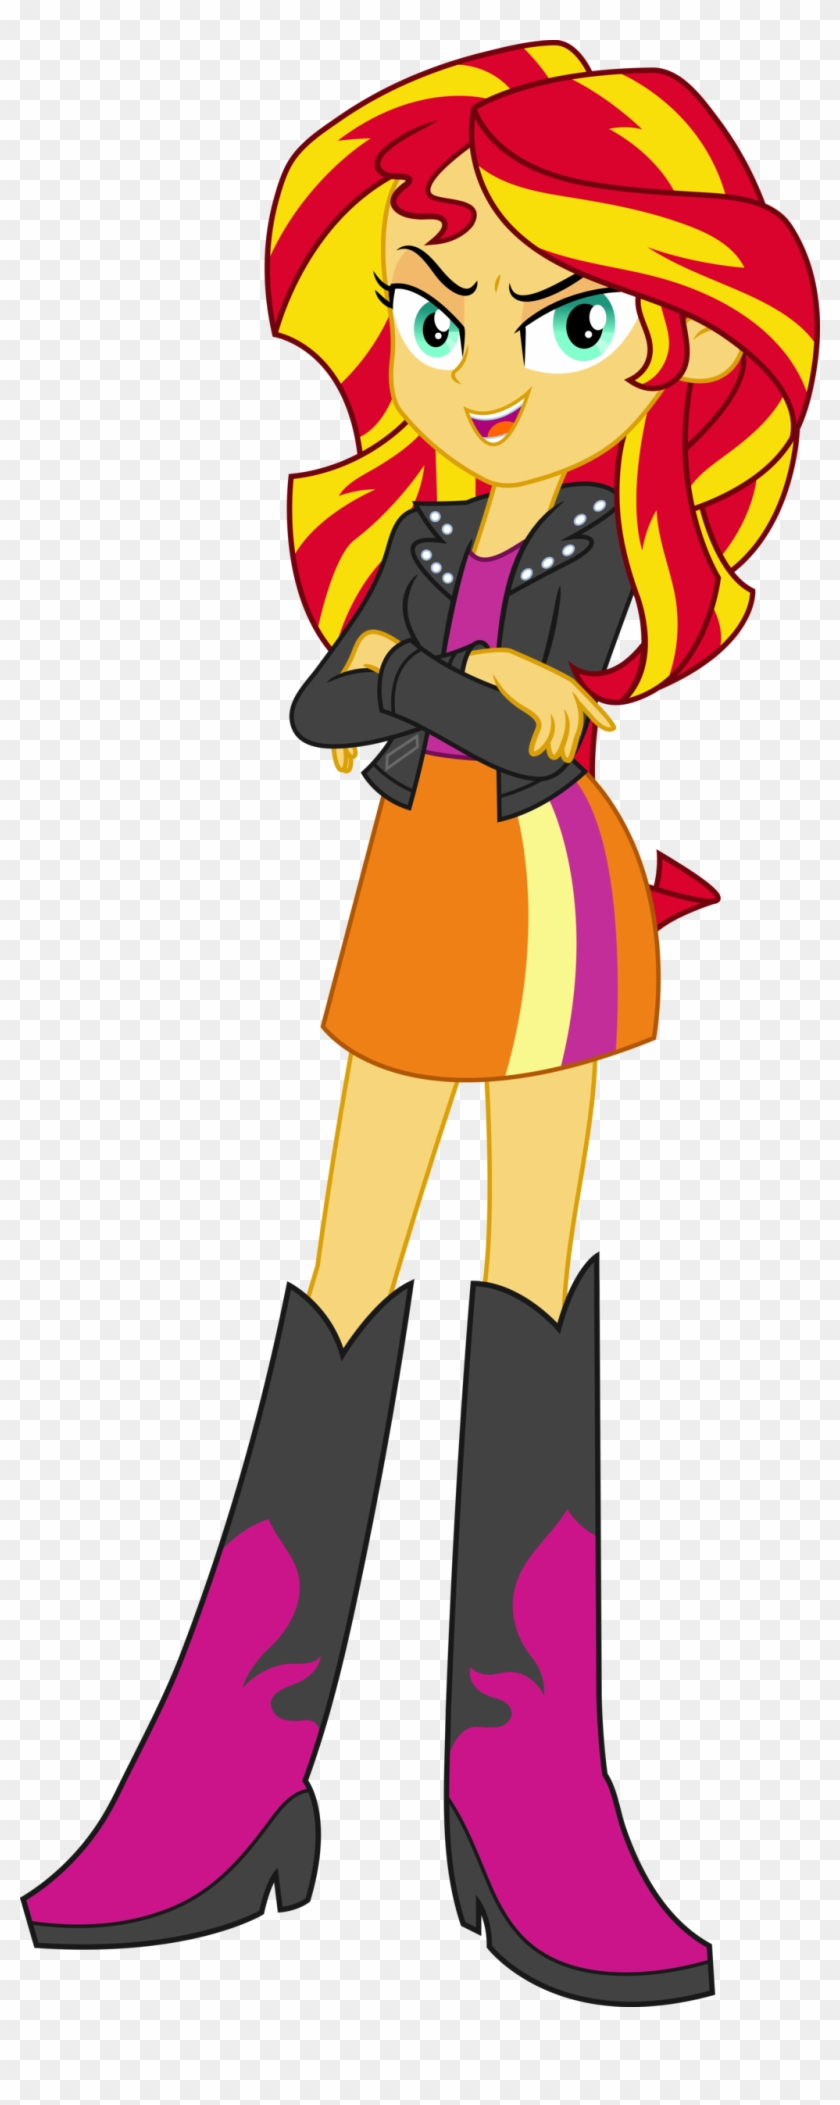 Equestria Girls Sunset Shimmer Vector By Icantunloveyou - My Little Pony Equestria Girls Sunset Shimmer #733585